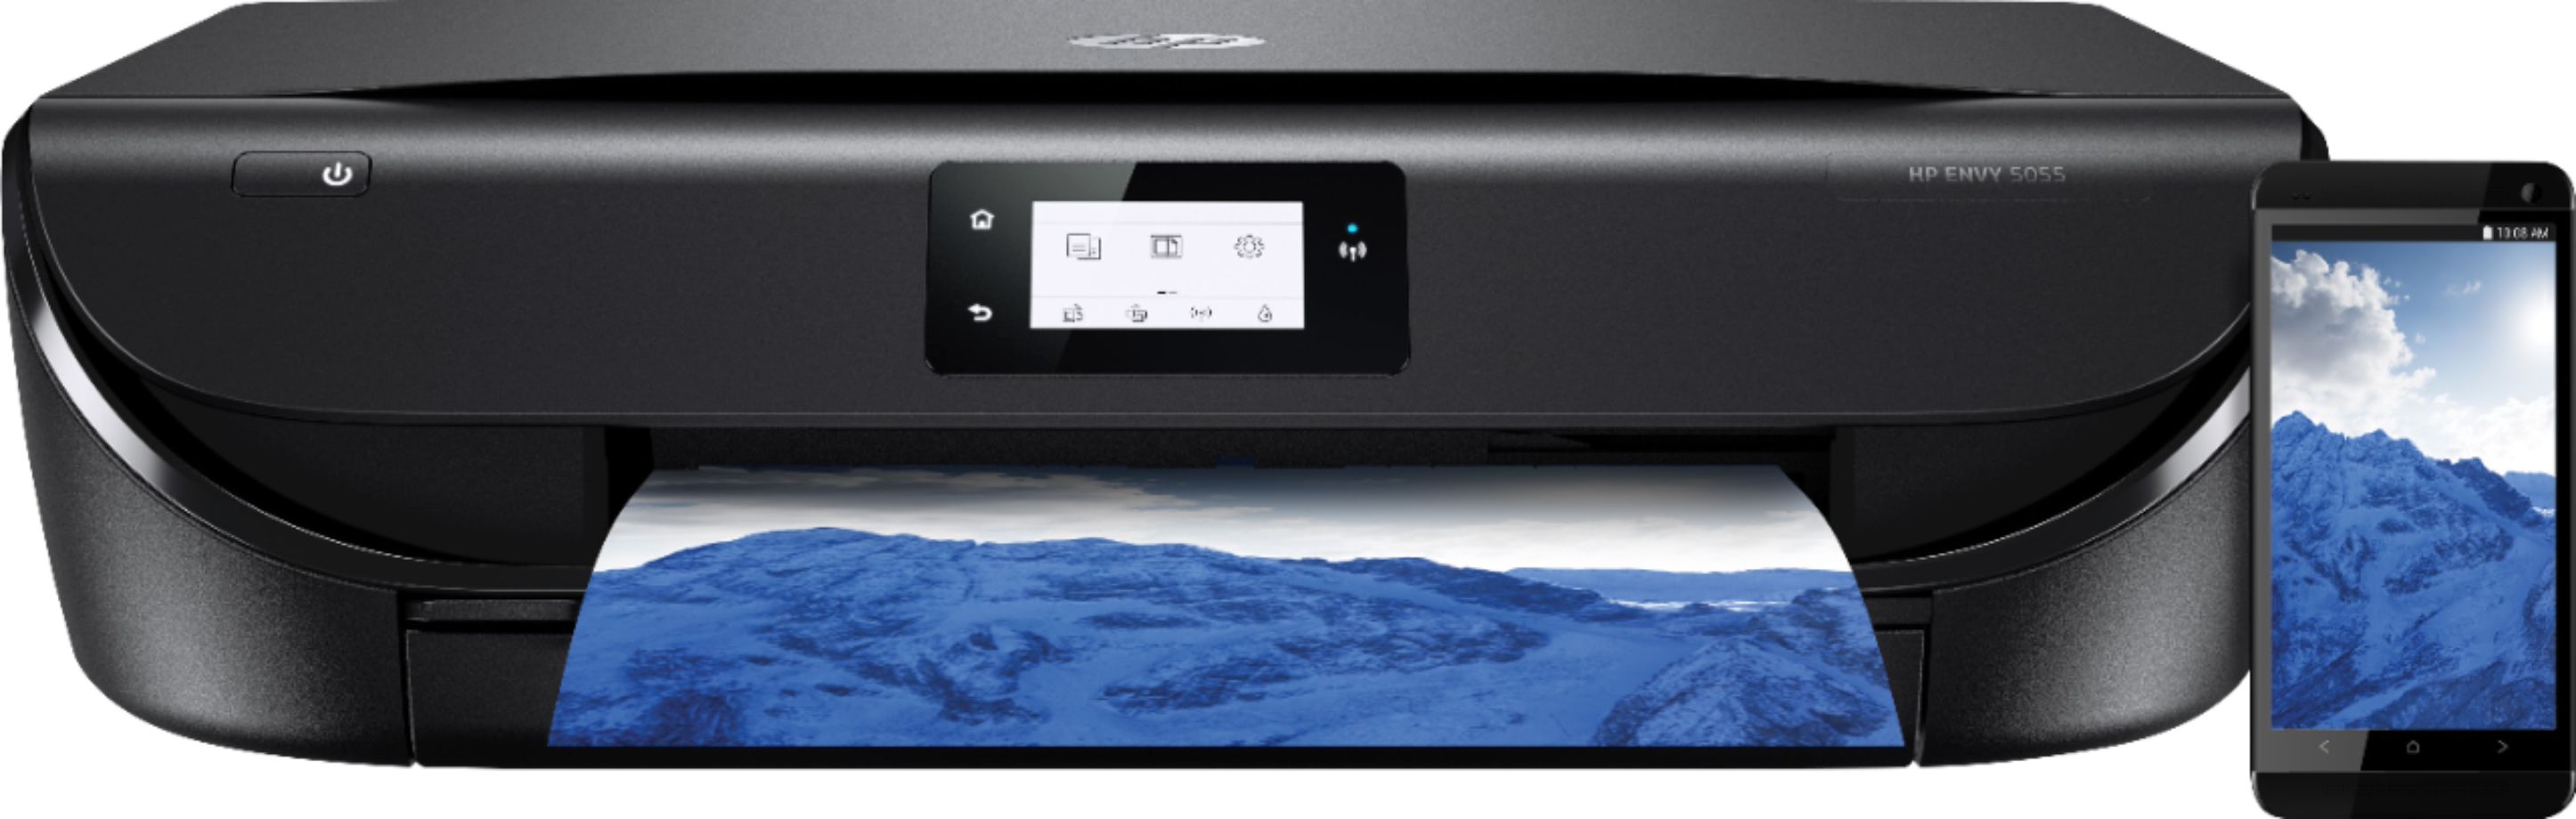 HP® ENVY 5055 All-in-One Printer